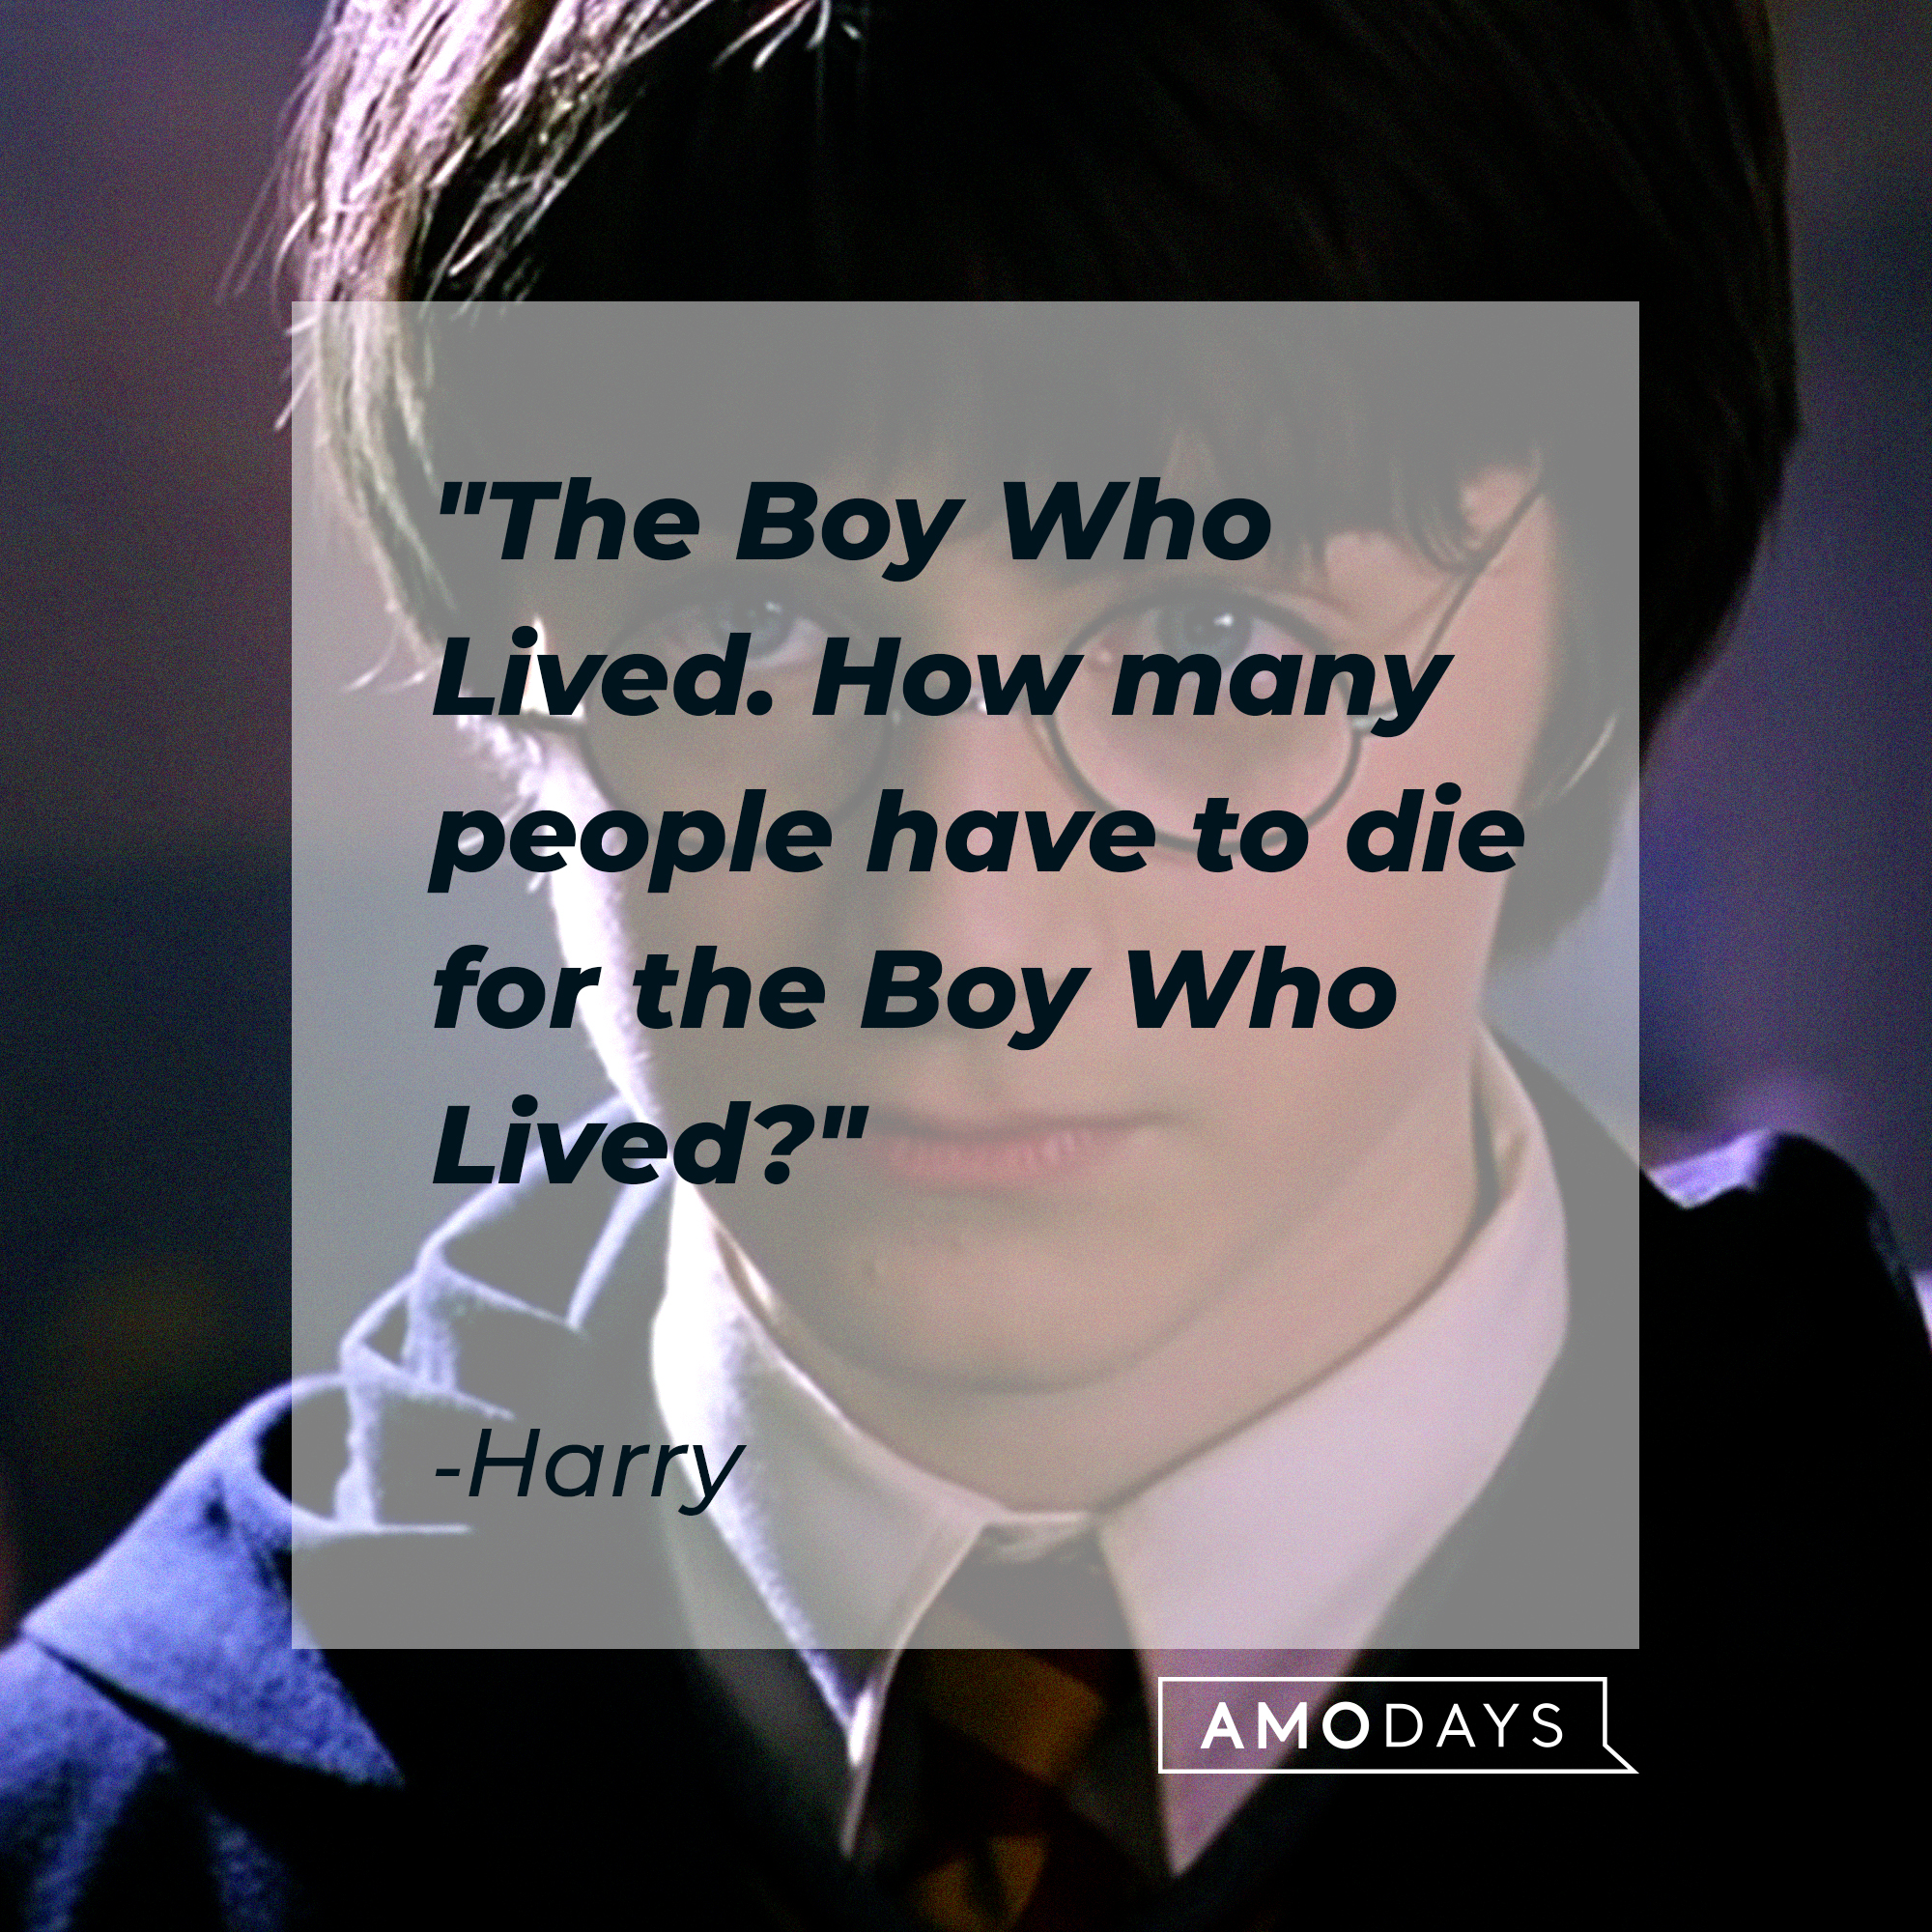 A photo of Harry Potter with his quote, "The Boy Who Lived. How many people have to die for the Boy Who Lived?" | Source: YouTube/harrypotter